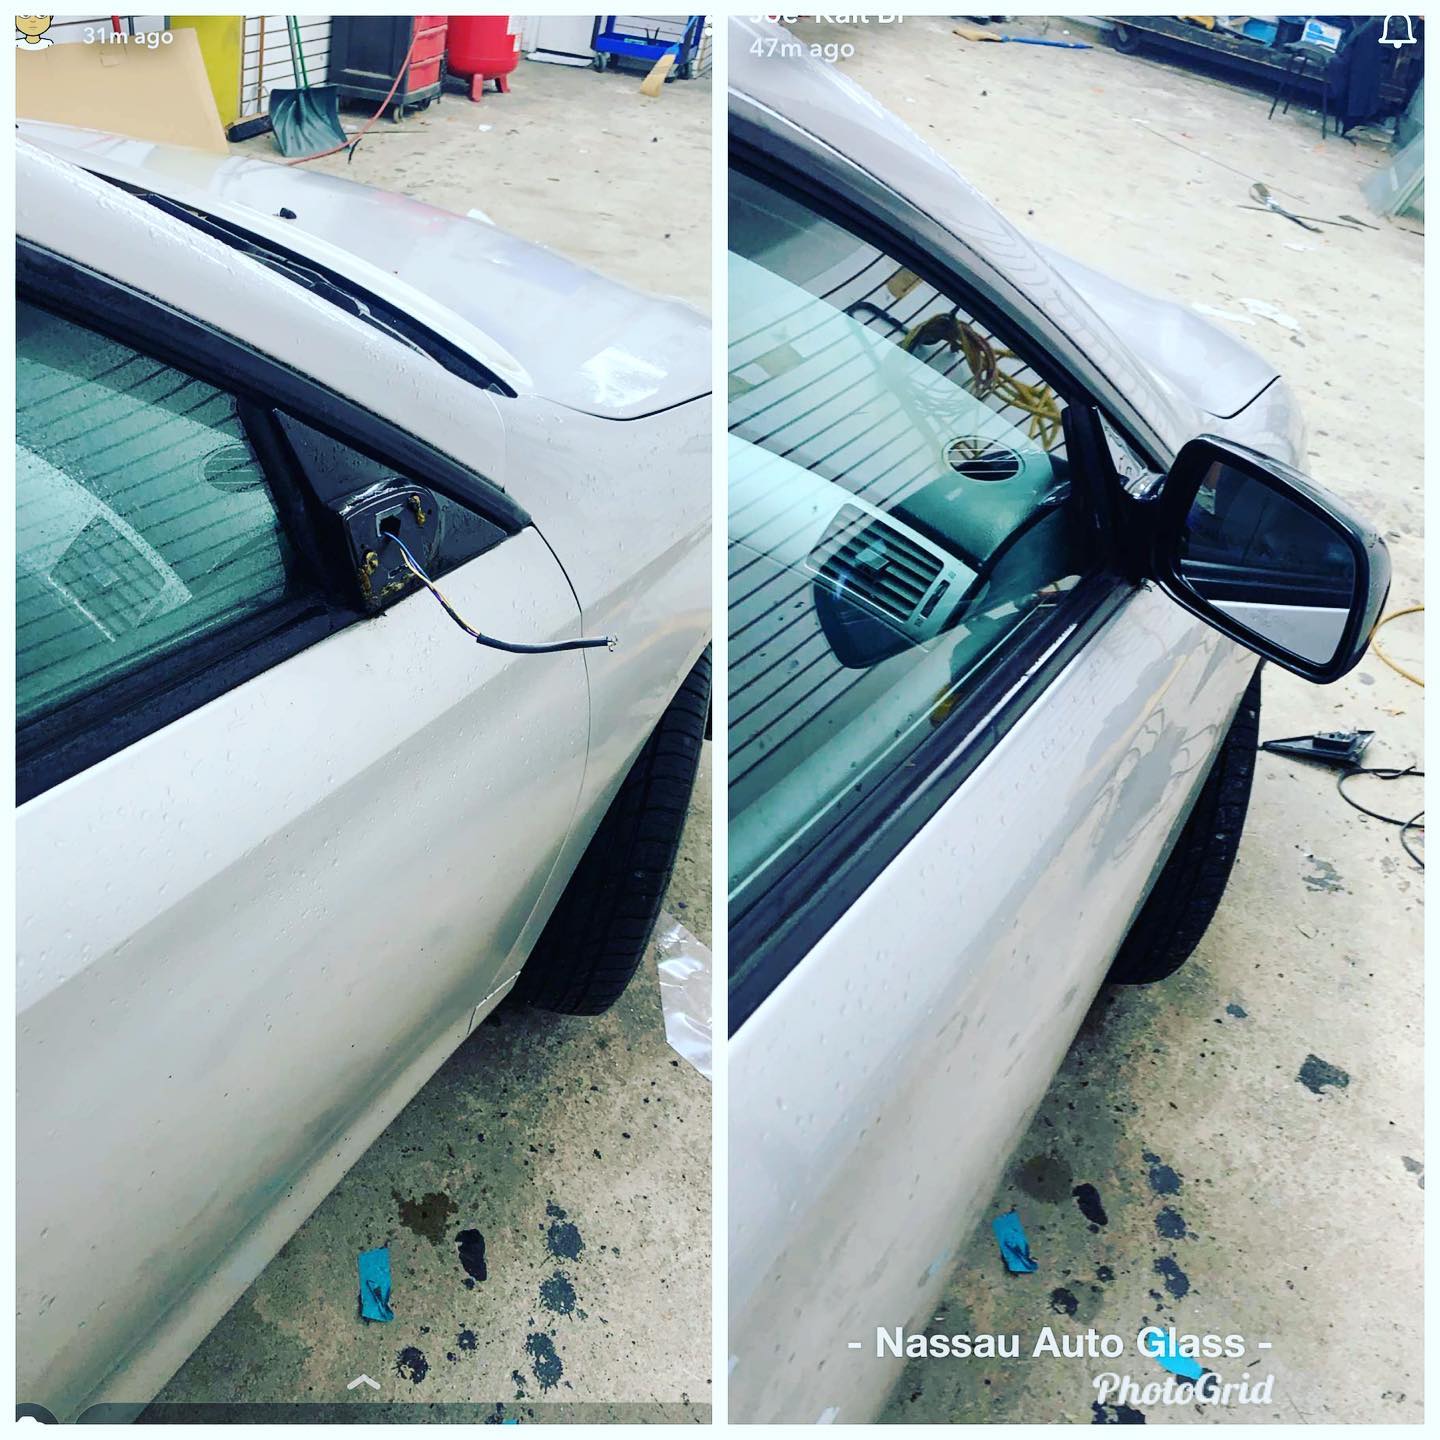 Nassau Auto Glass Services: Before & After Picture 14